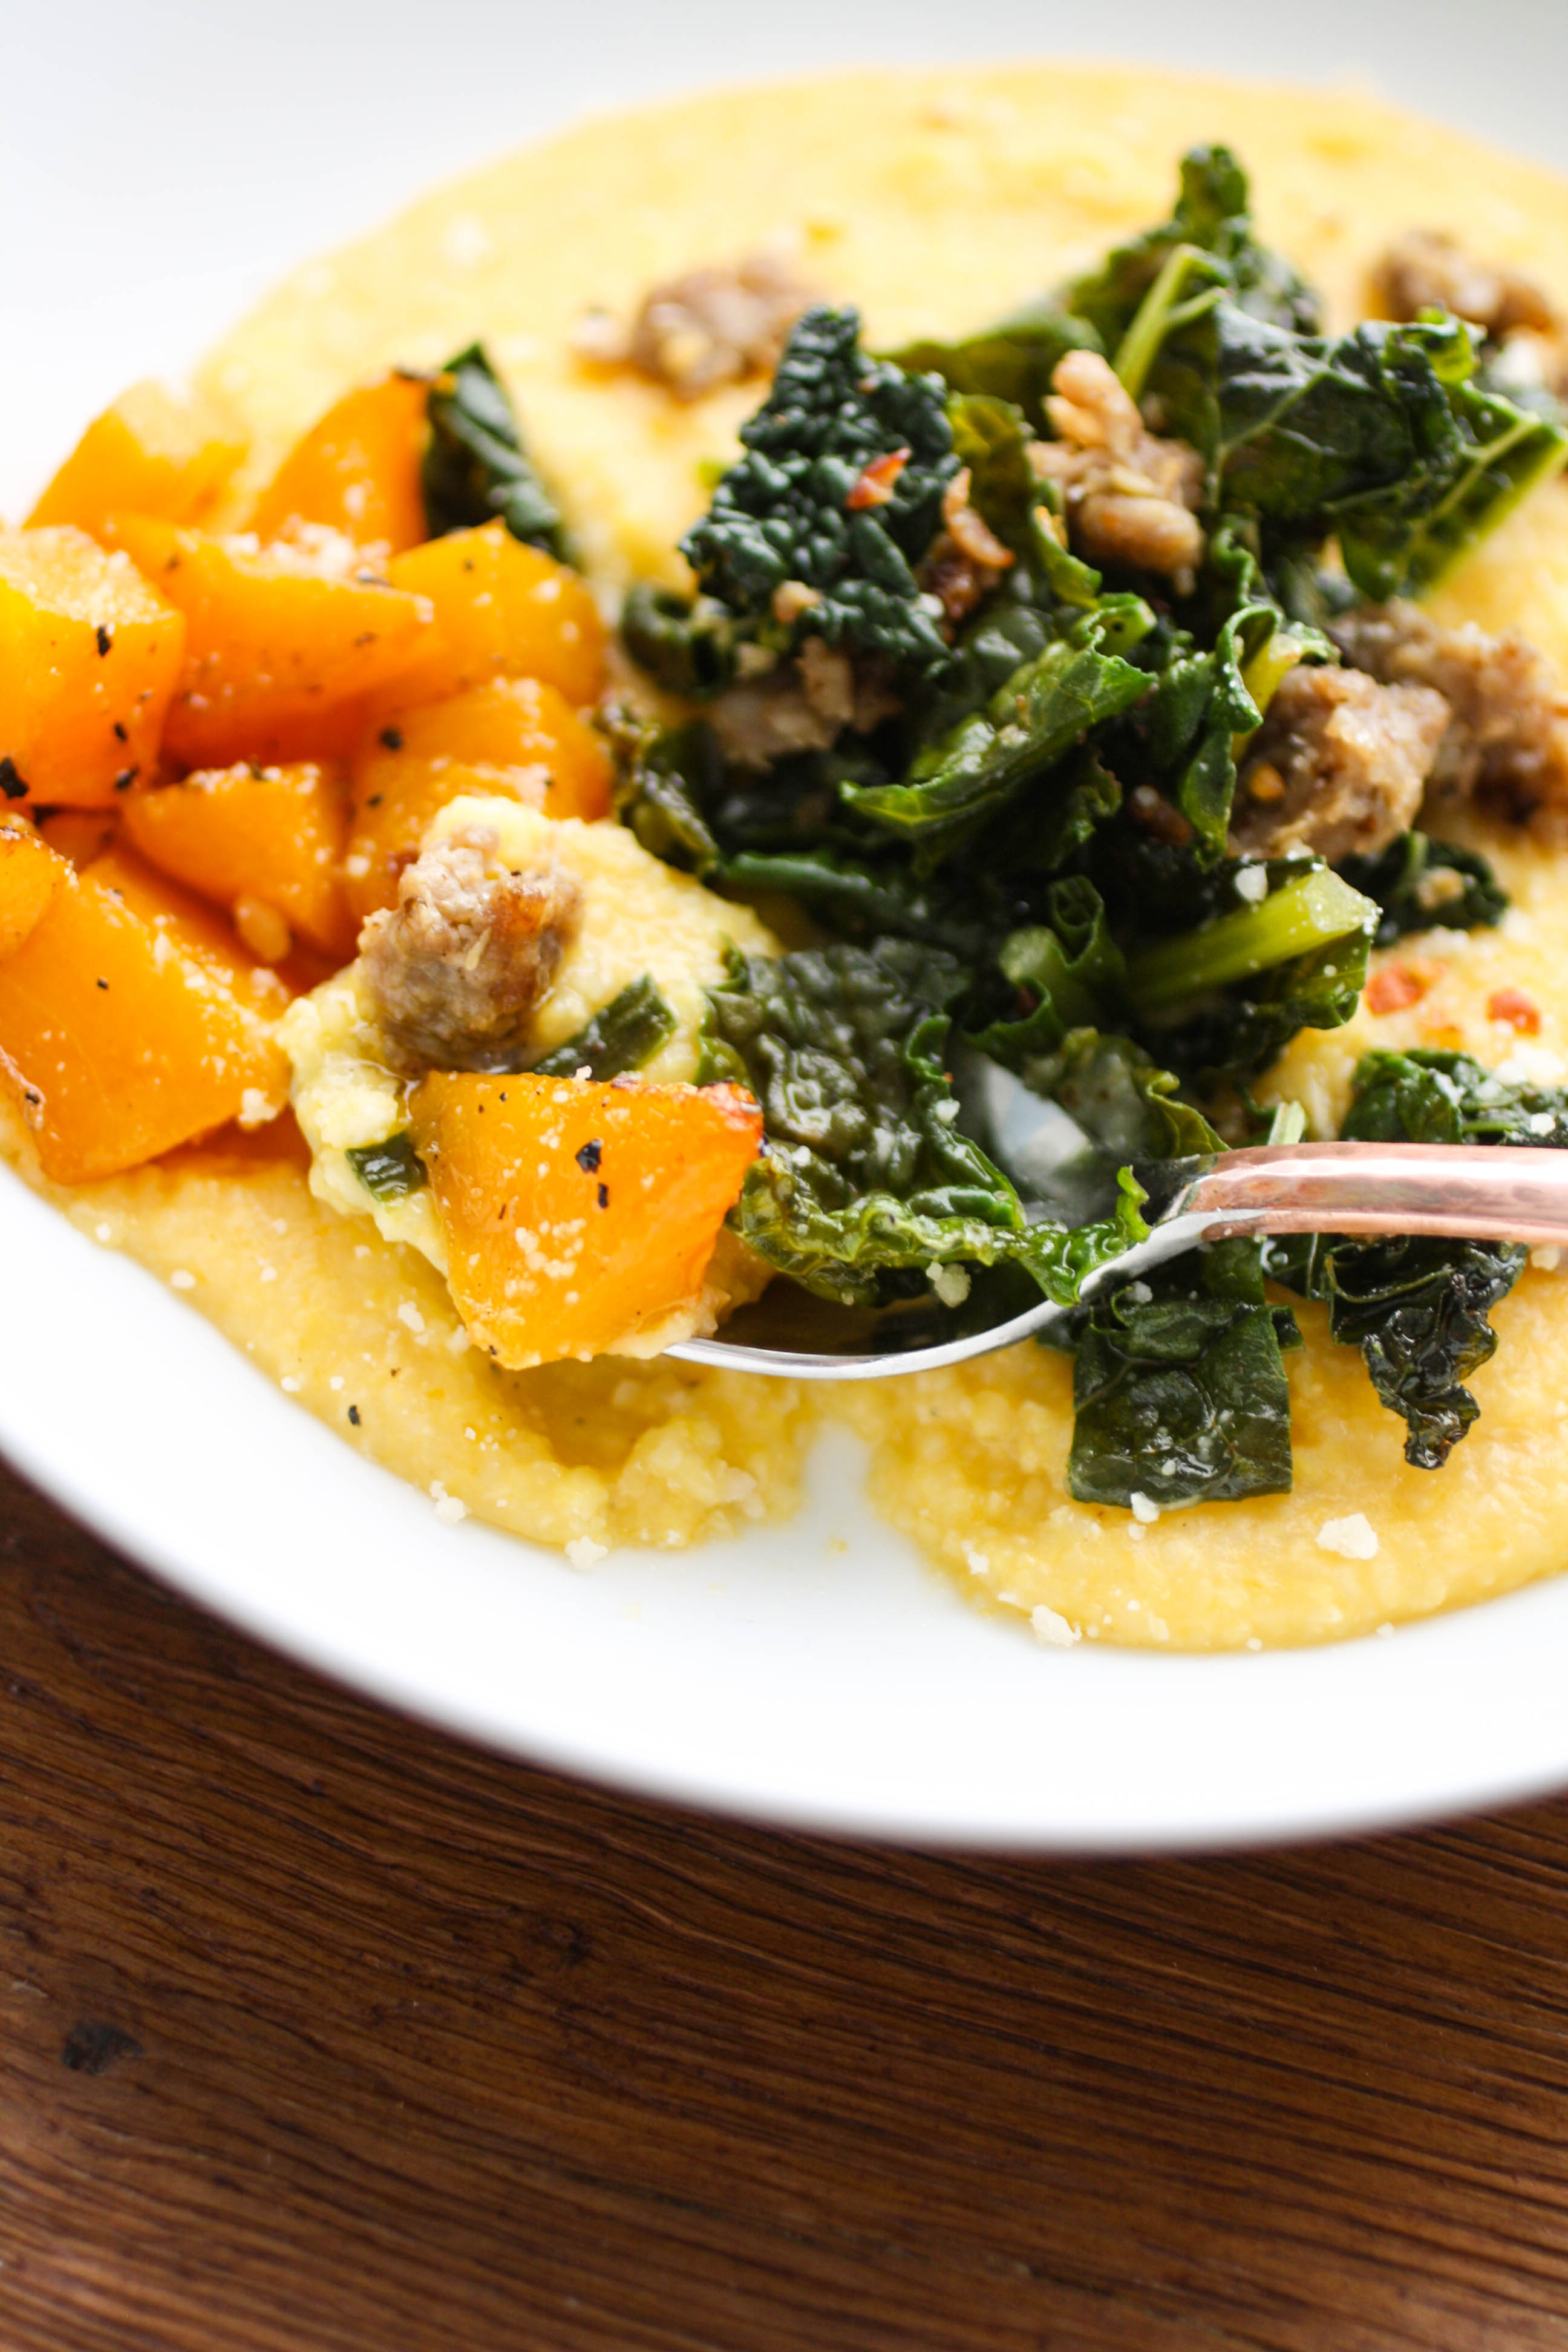 Butternut Squash Grits with Sausage and Kale is a warming and flavorful dish on a cold night. You'll want to scoop up spoonful after spoonful of these grits.